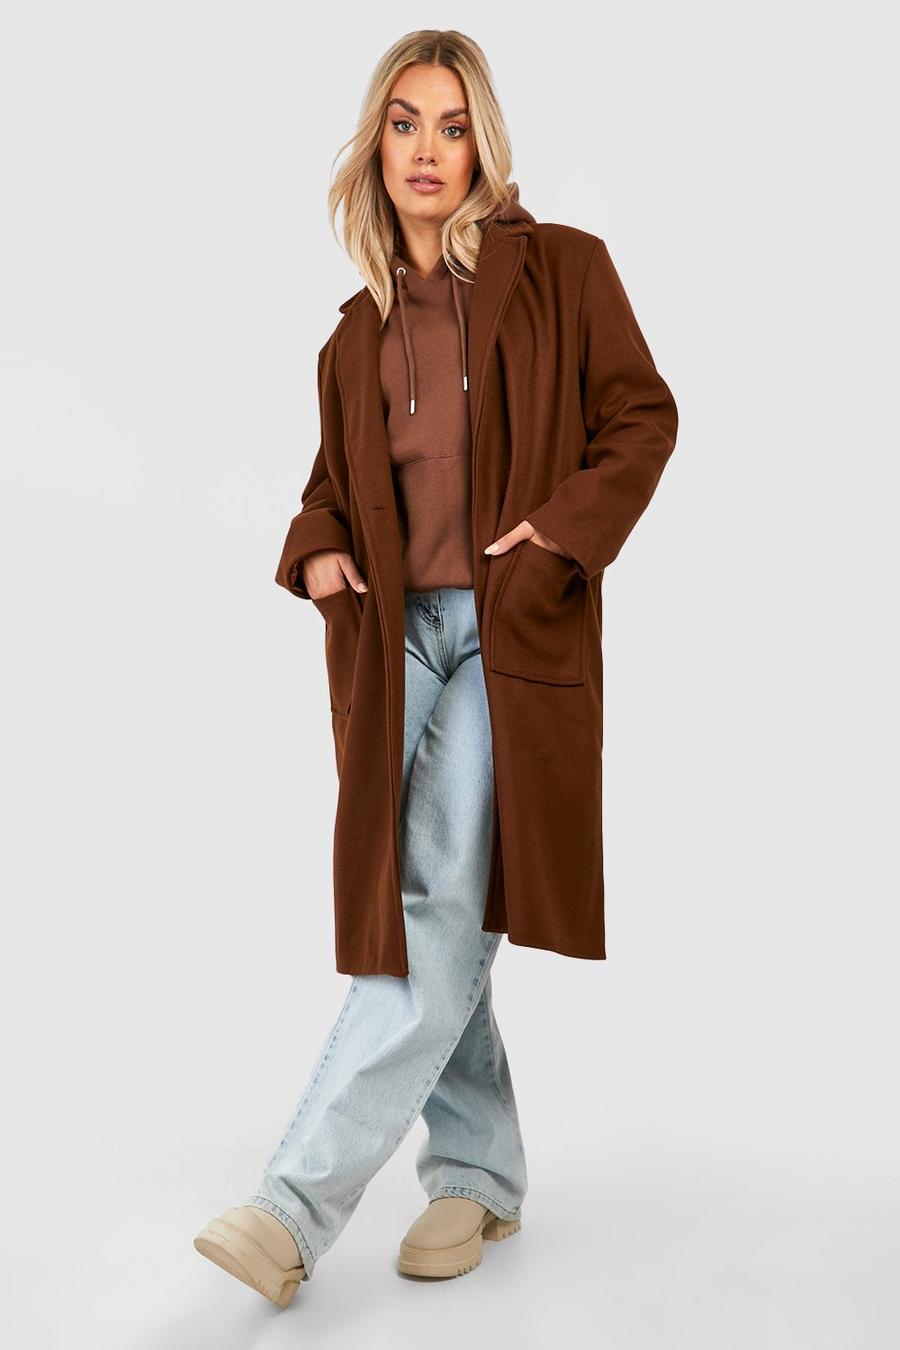 Chocolate marron Plus Wool Look Coat With Pockets